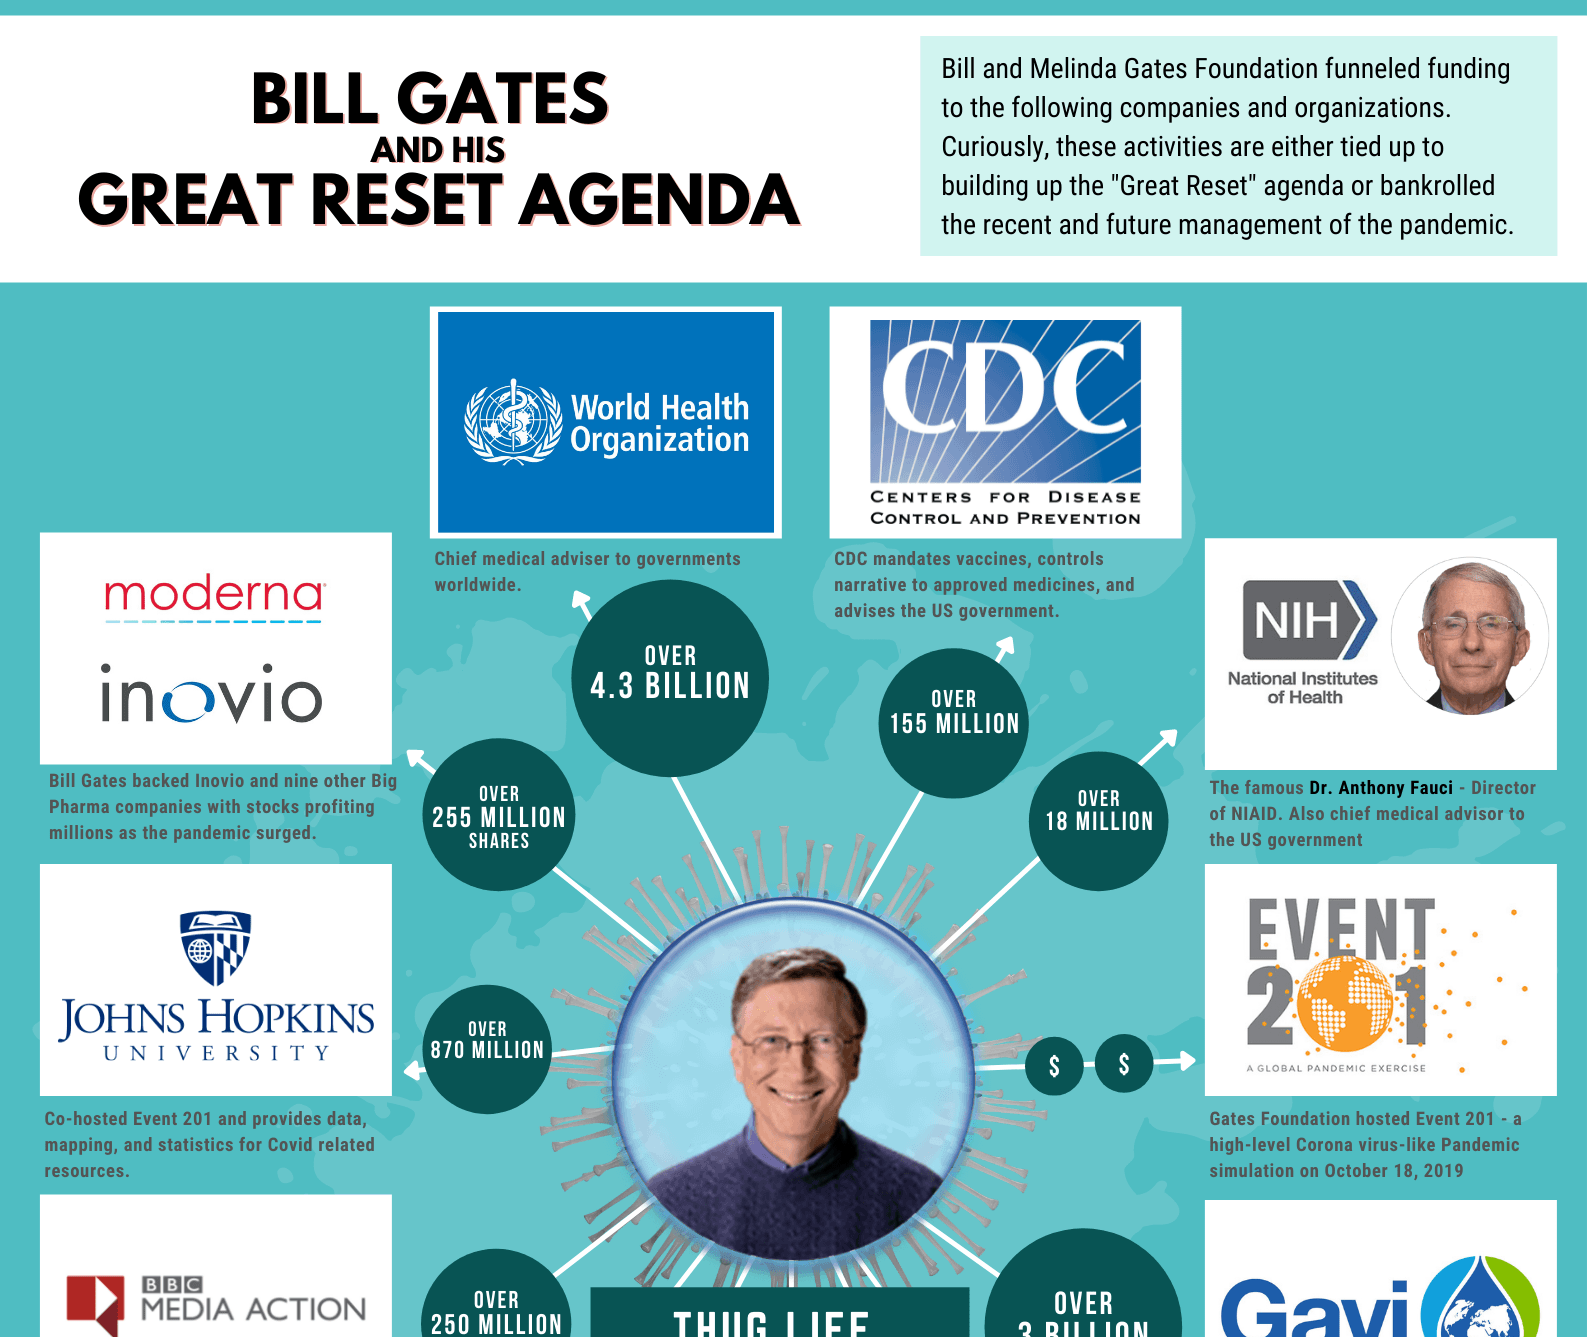 Bill Gates and his Great Reset agenda